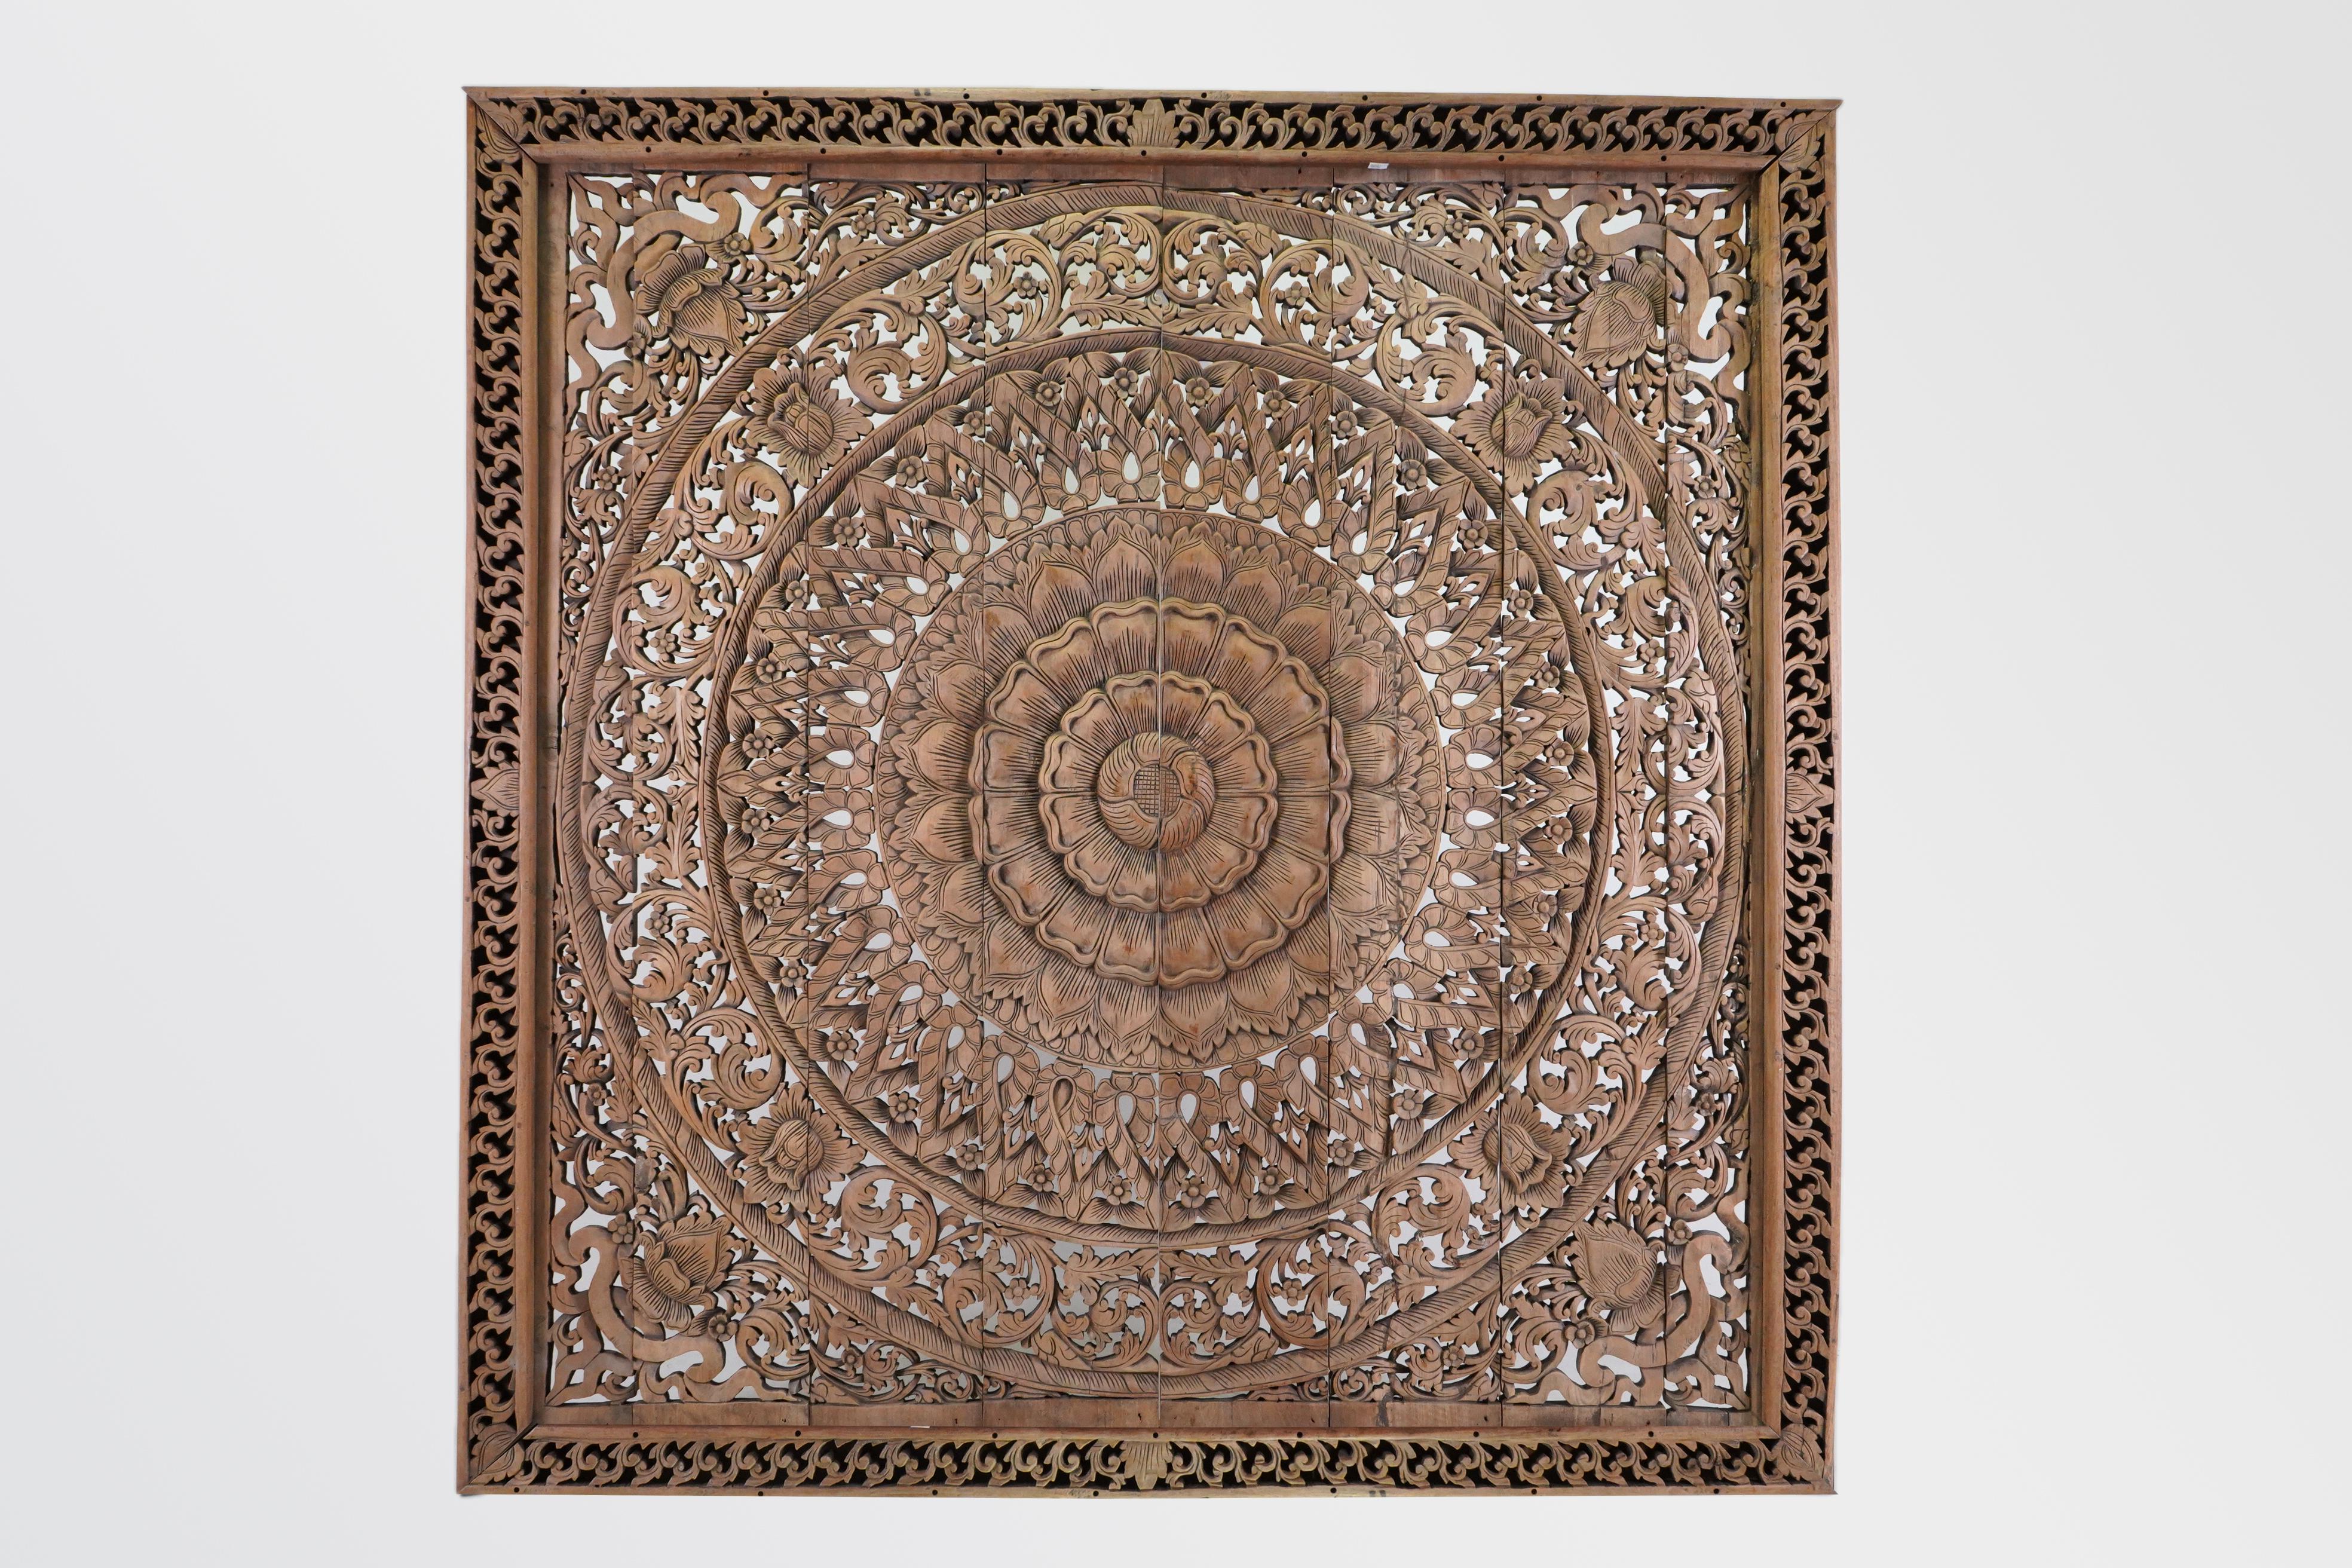 Northern Thai temples often featured intricately carved wooden ceilings made up of coffered panels. The panels themselves were square with a circular design in the center. The overall effect is of a series of ornate wheels or cogs within a square